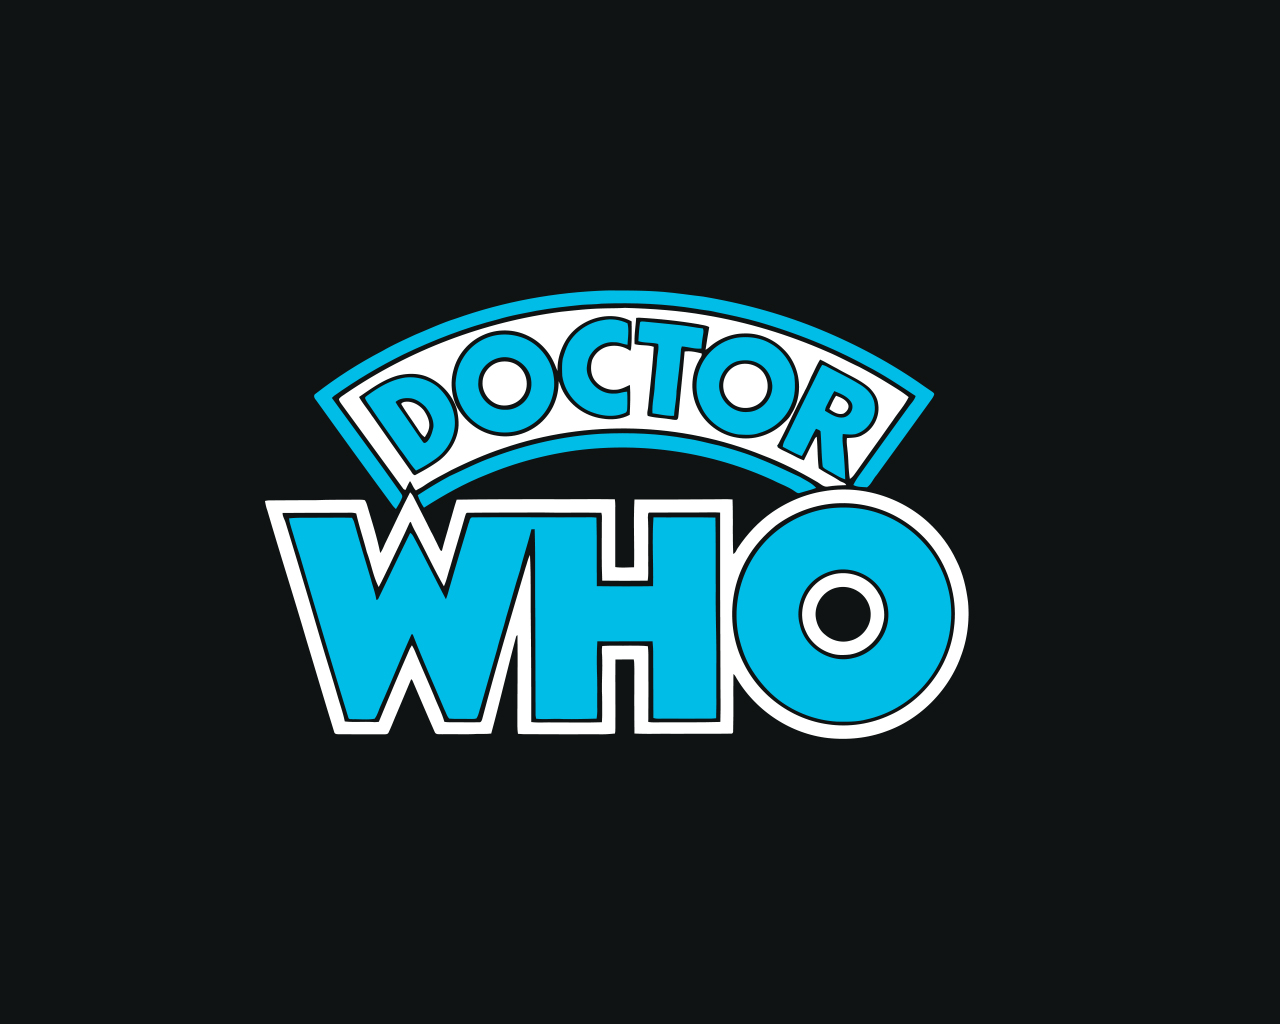 Free HD doctor who, tv show